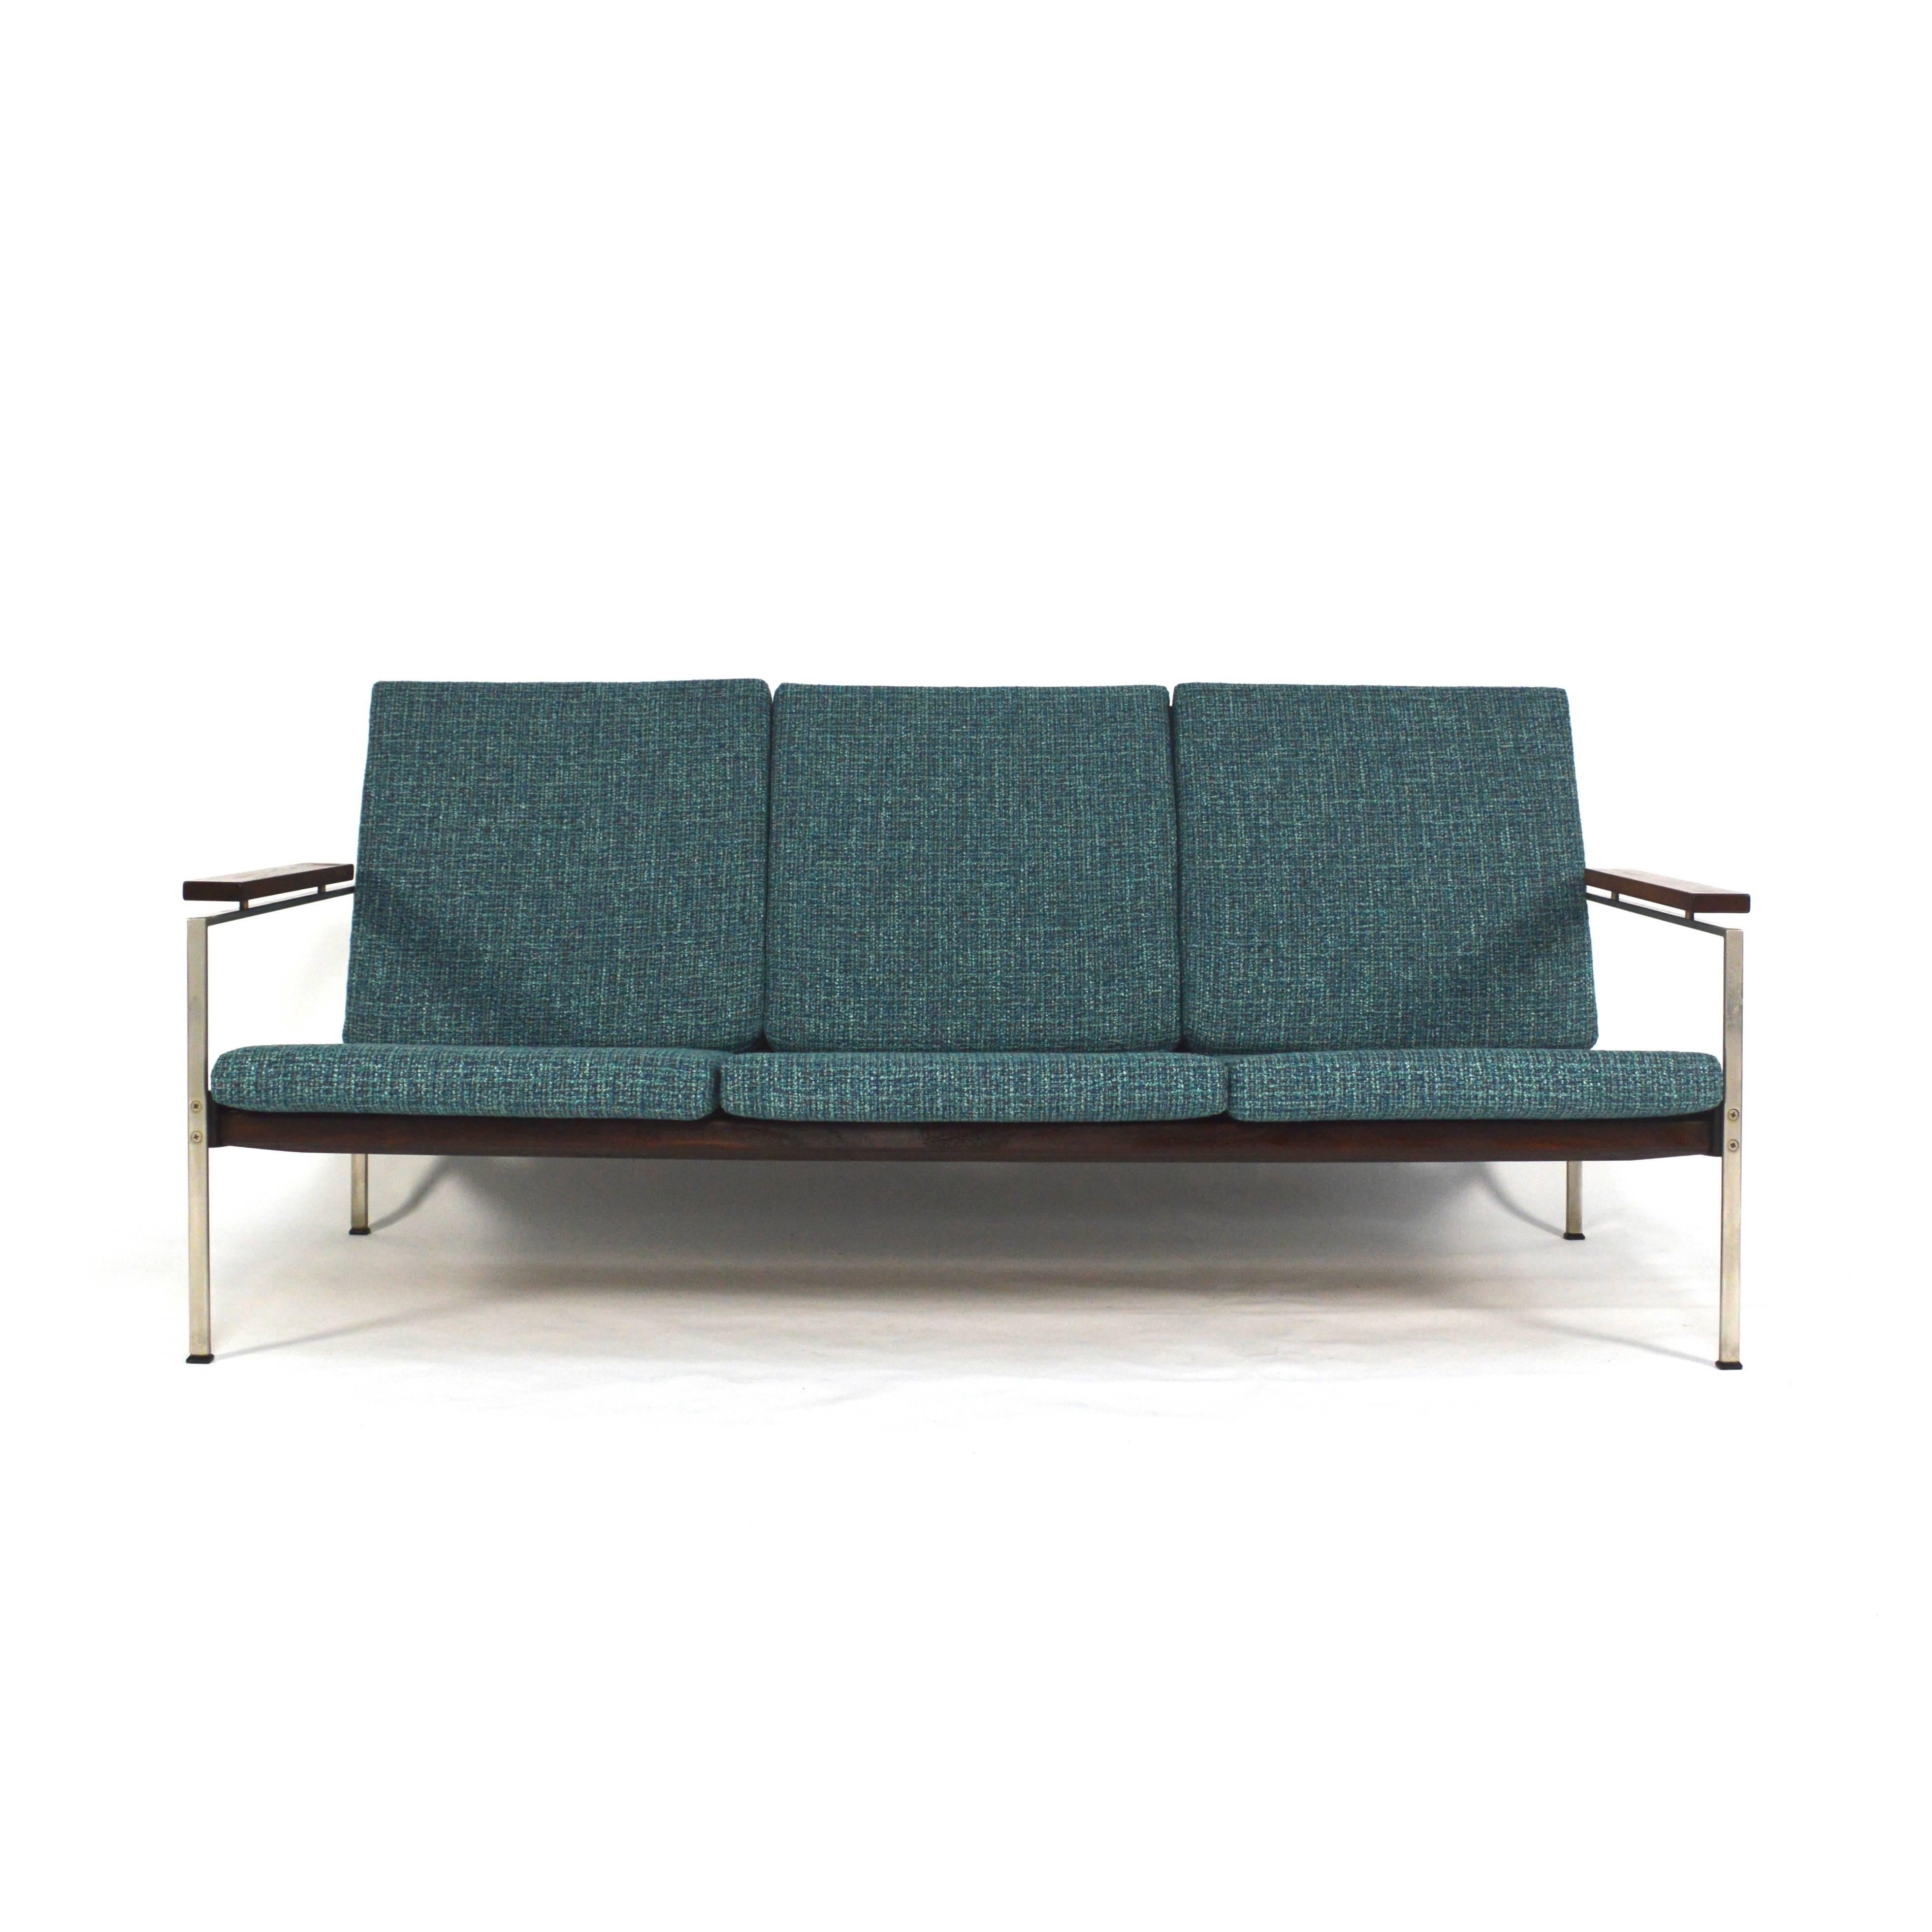 Beautiful Brazilian rosewood and brushed metal sofa by Rob Parry.
Parry was a protégé of the famous Dutch designer Gerrit Rietveld.
The sofa has been reupholstered with new fabric and foam. The armrest has been restored.
We offer competitive